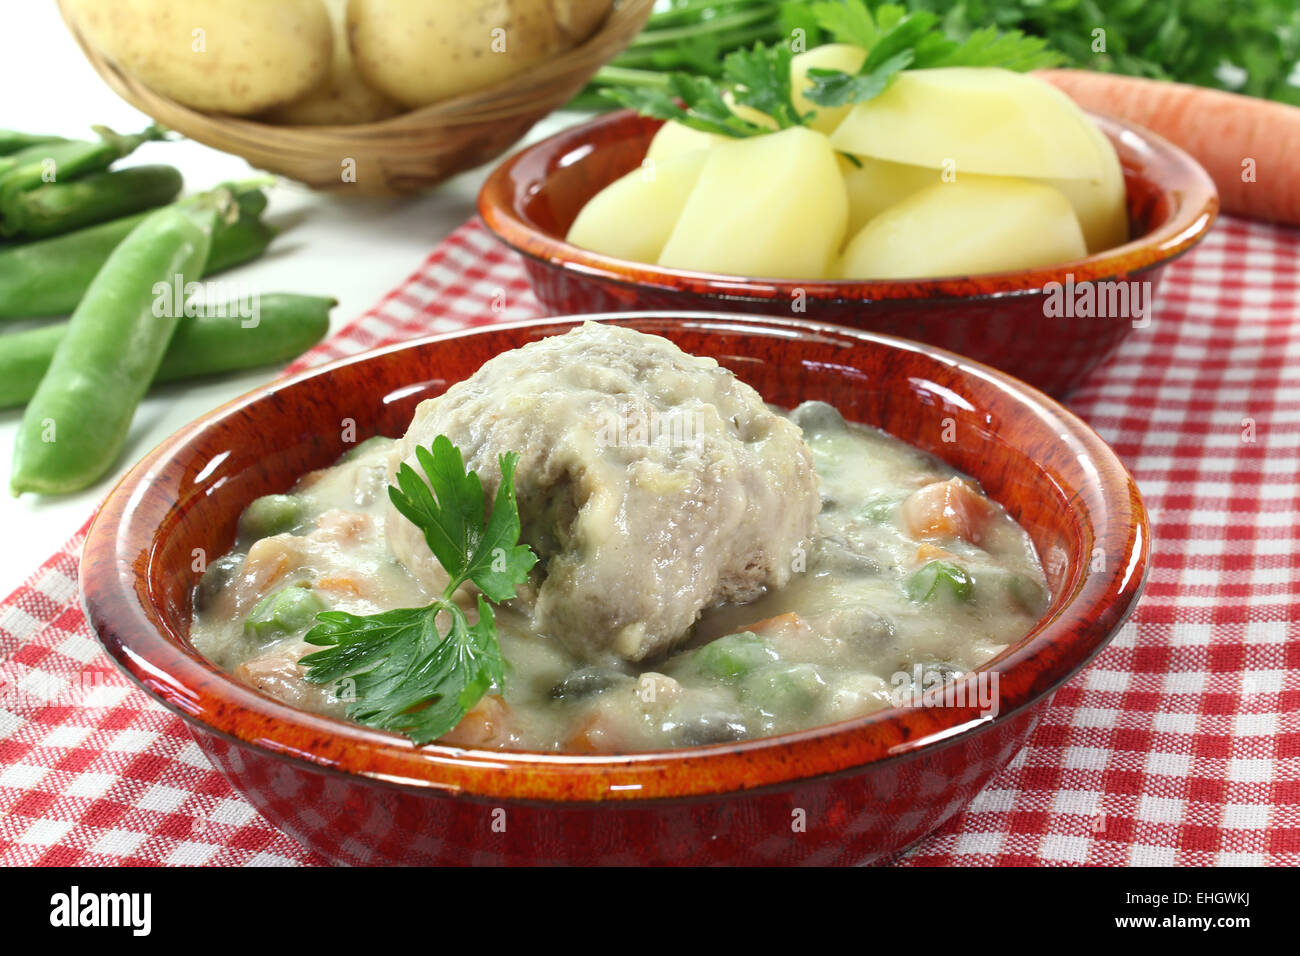 cooked meatballs in a white sauce with parsley Stock Photo